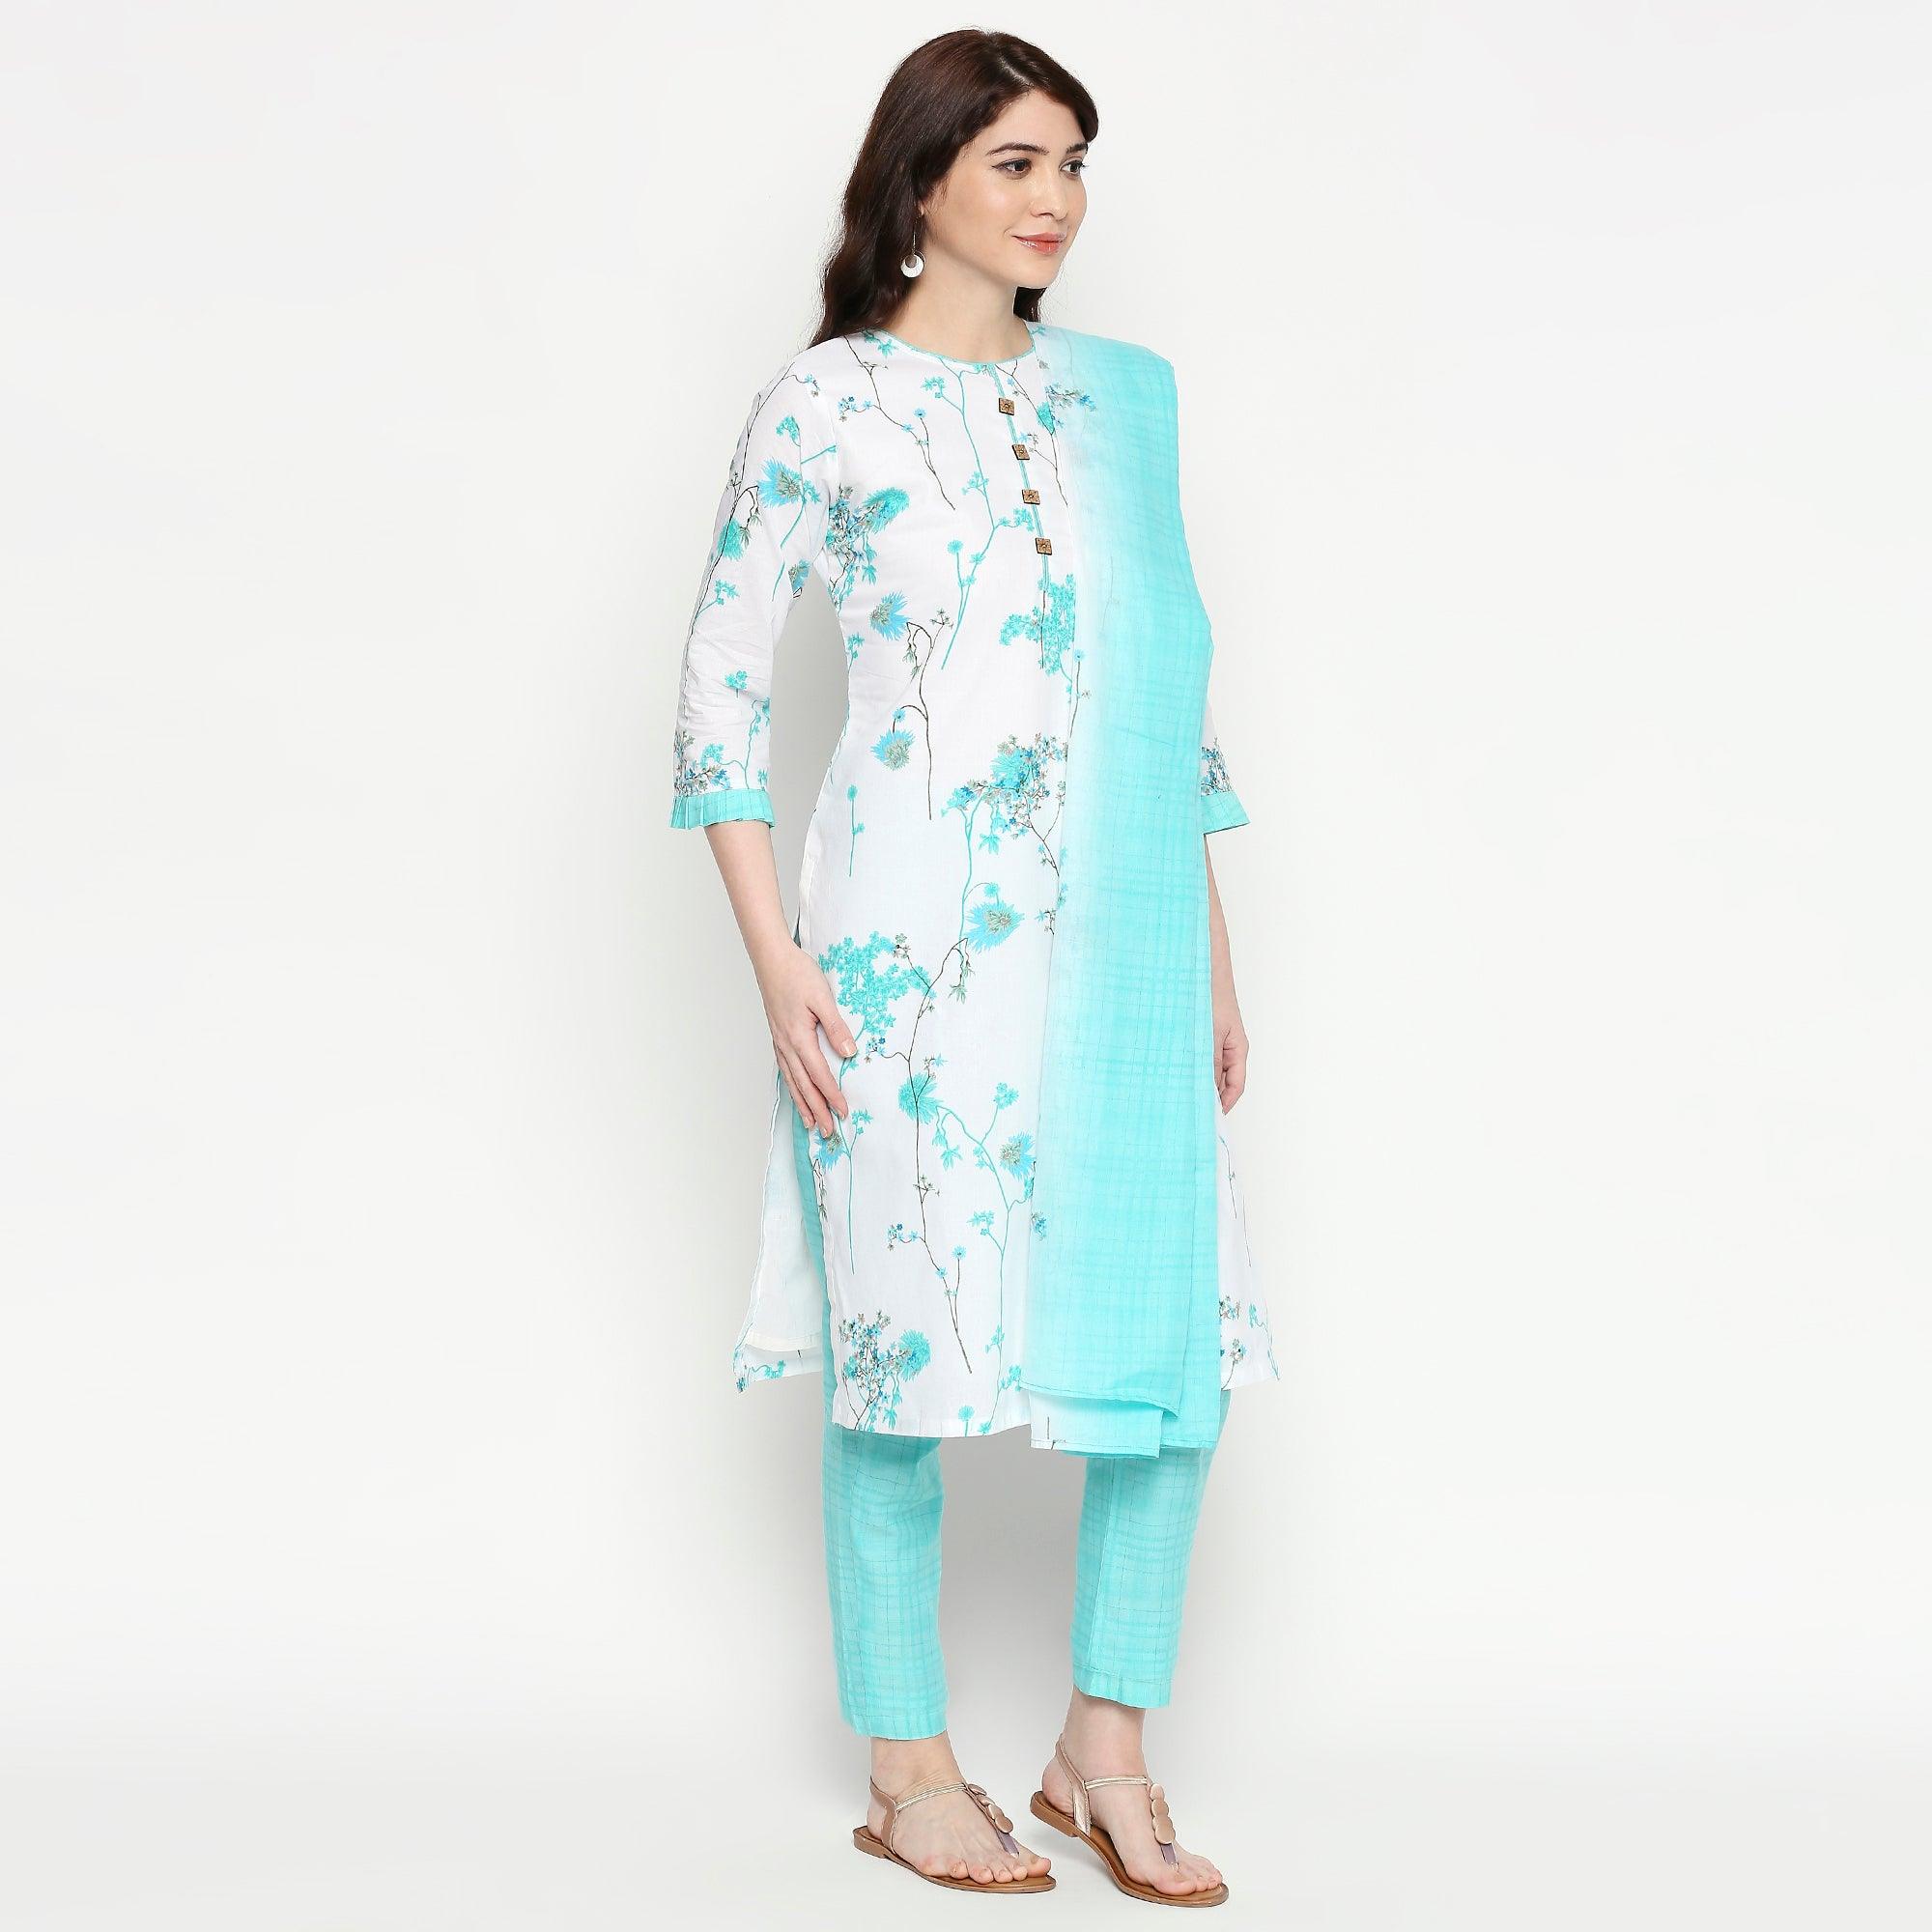 Graceful White-Blue Colored Casual Wear Floral Printed Cotton Kurti-Pant Set With Dupatta - Peachmode